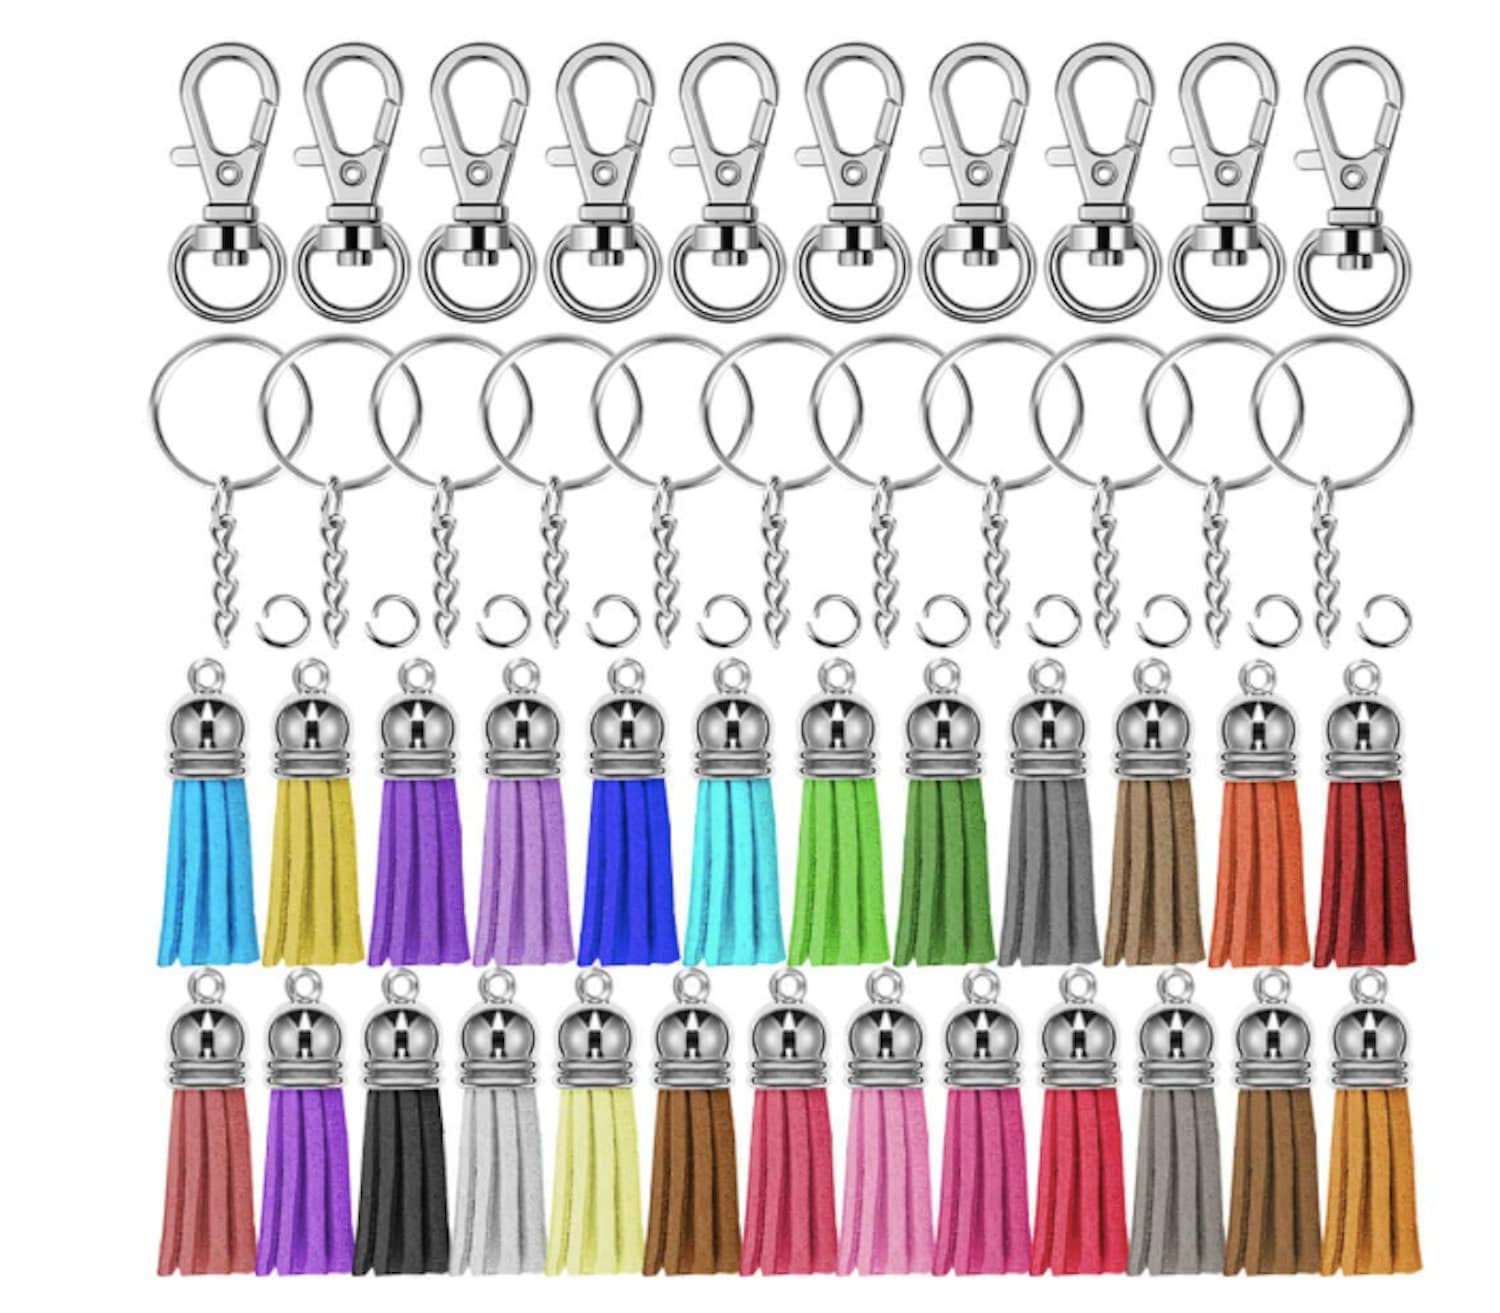 10 Pieces Keychain Charms Tassels Decorations Accessory Finding Supplies  Craft Accessories Jewelry Making Props Tassel for DIY